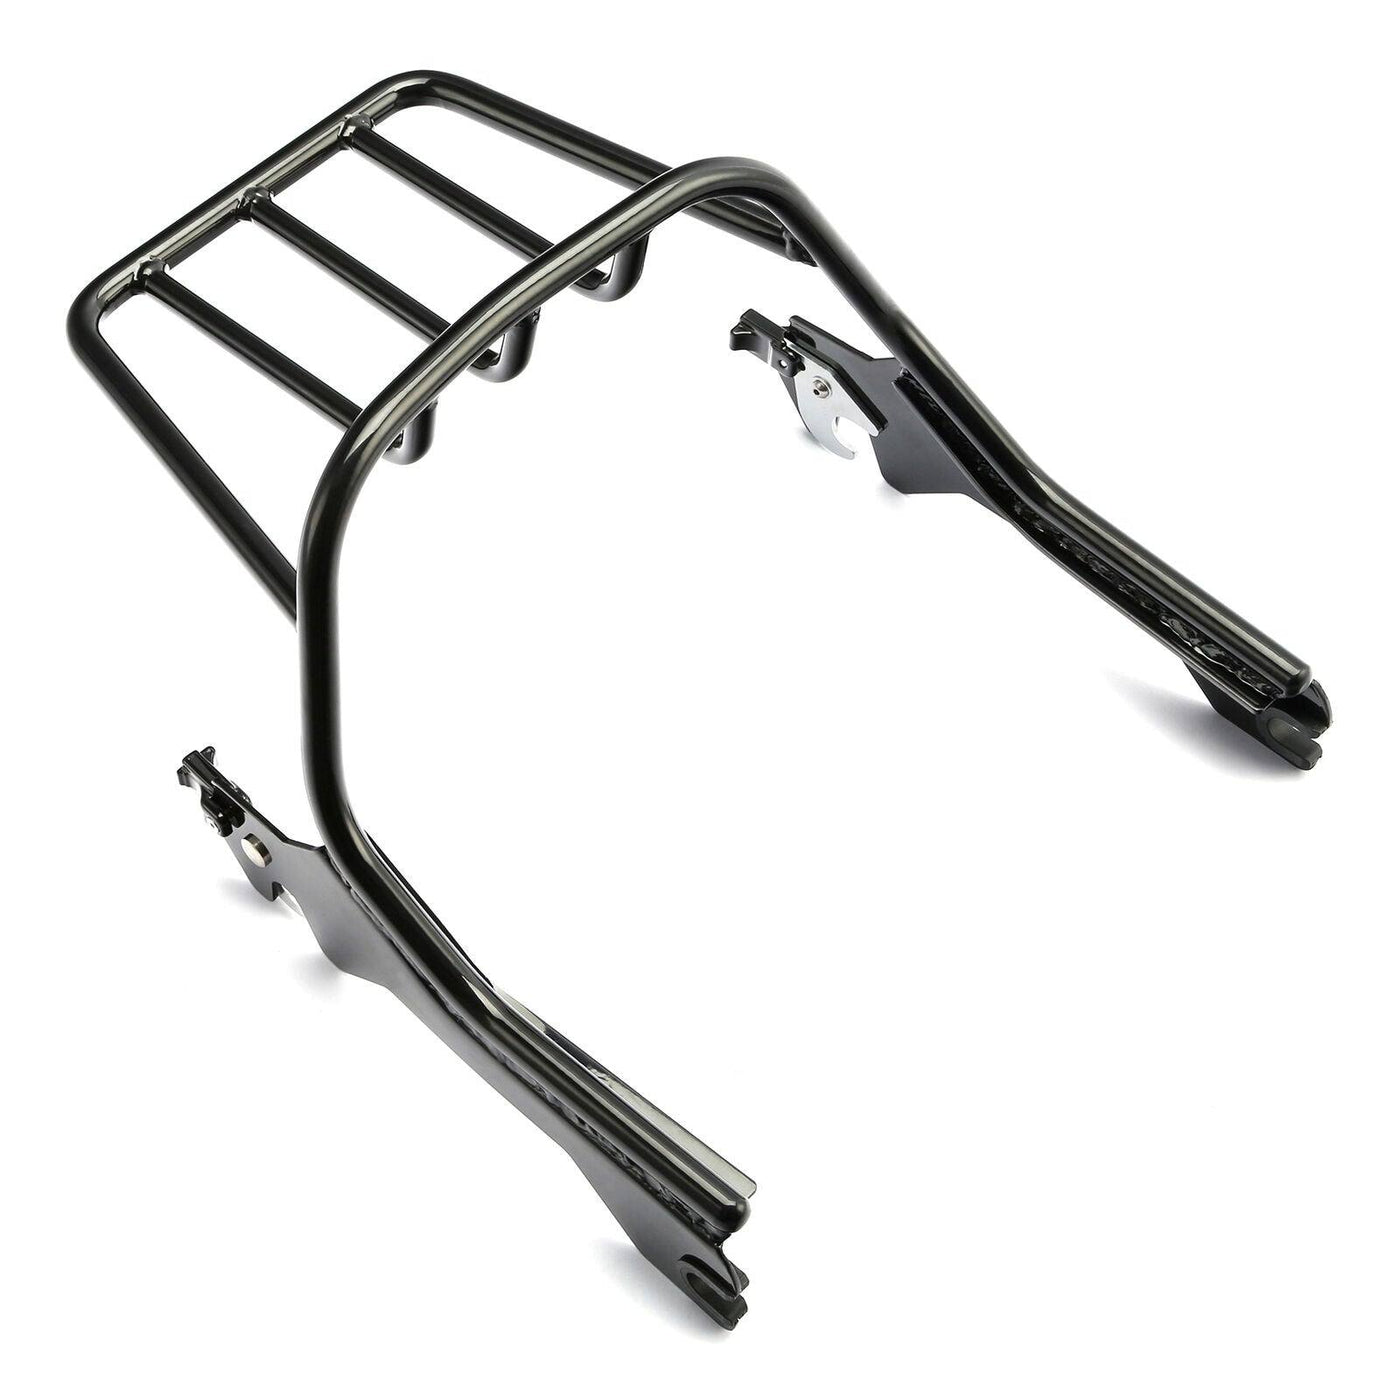 Two Up Luggage Rack Fit For Harley Softail Fat Boy 114 18-21 Breakout 114 18-20 - Moto Life Products